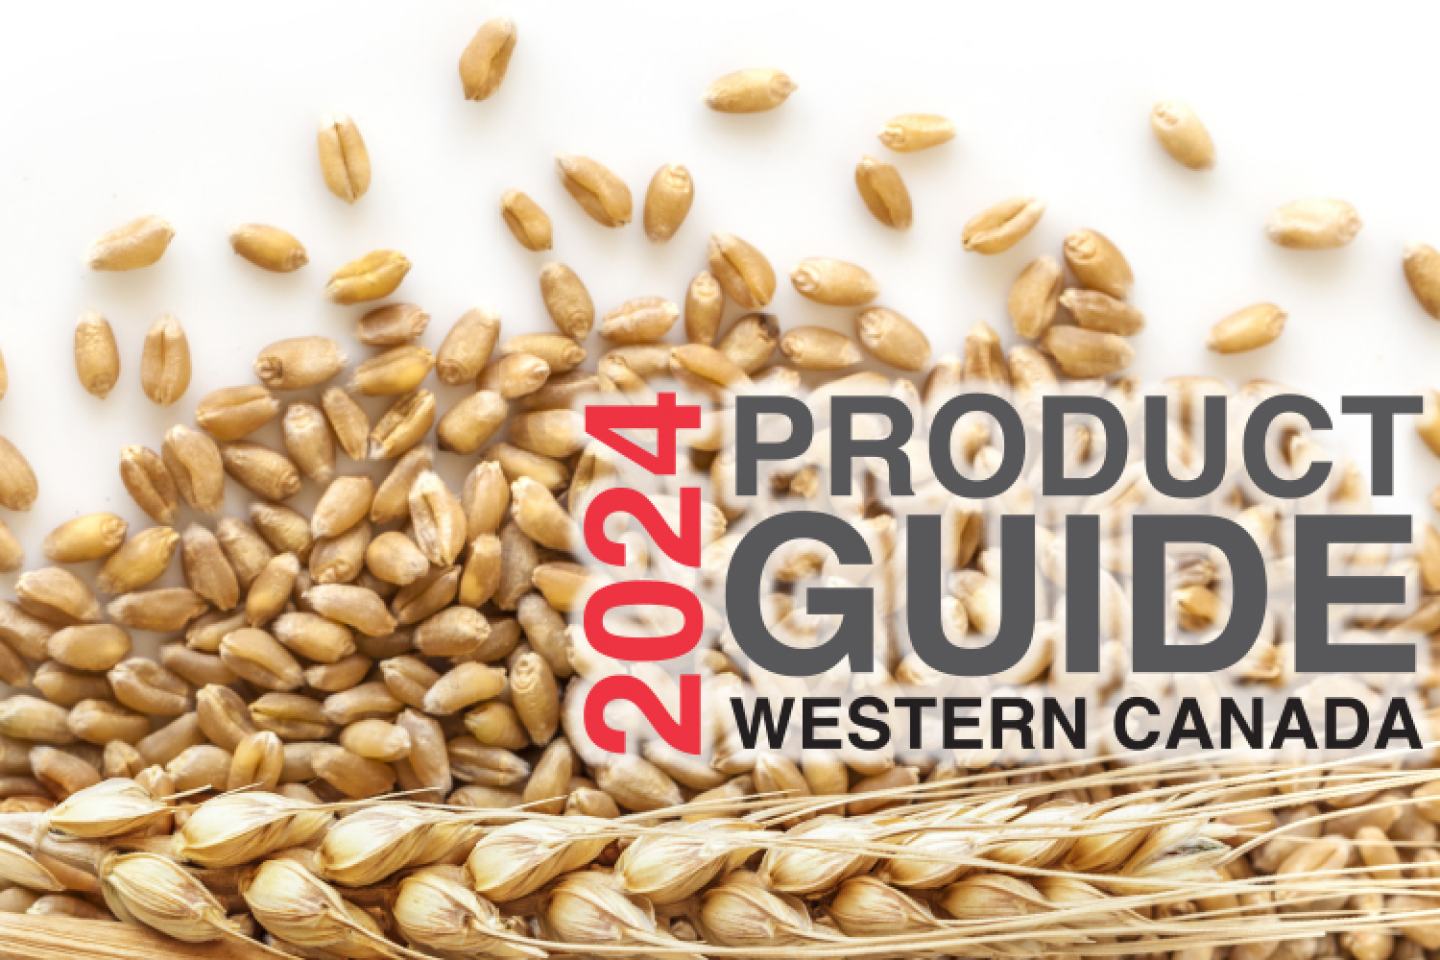 West Product Guide